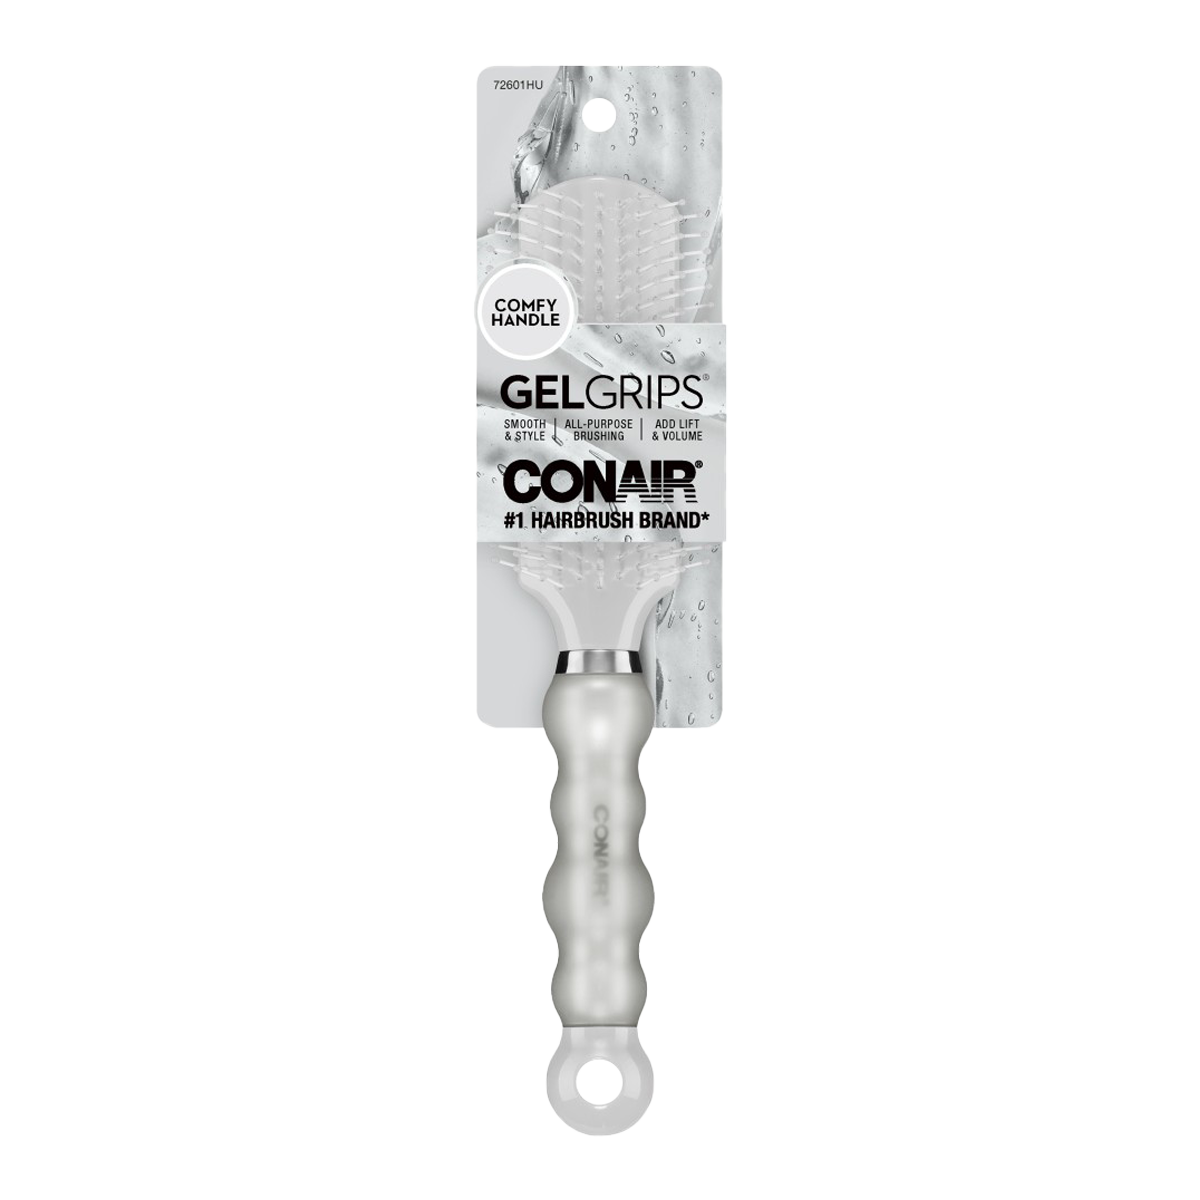 CEPILLO MULTIUSO GEL GRIPS® image number 5